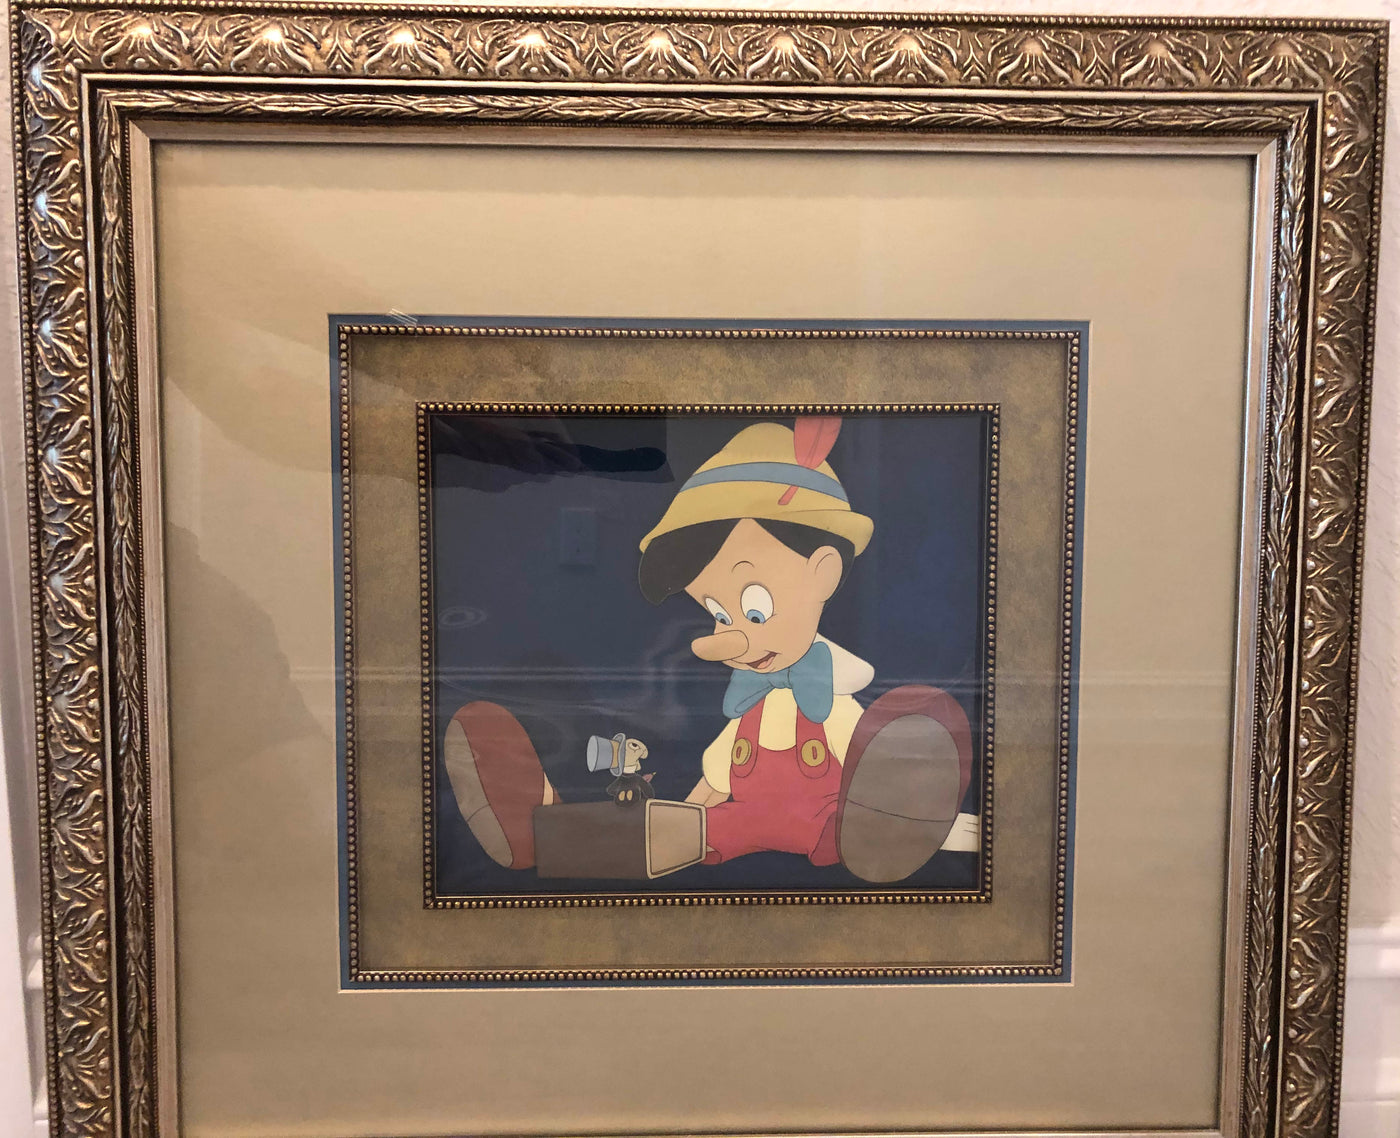 Original Walt Disney Production Cel of Pinocchio and Jiminy Cricket from Pinocchio on a Courvoisier Background